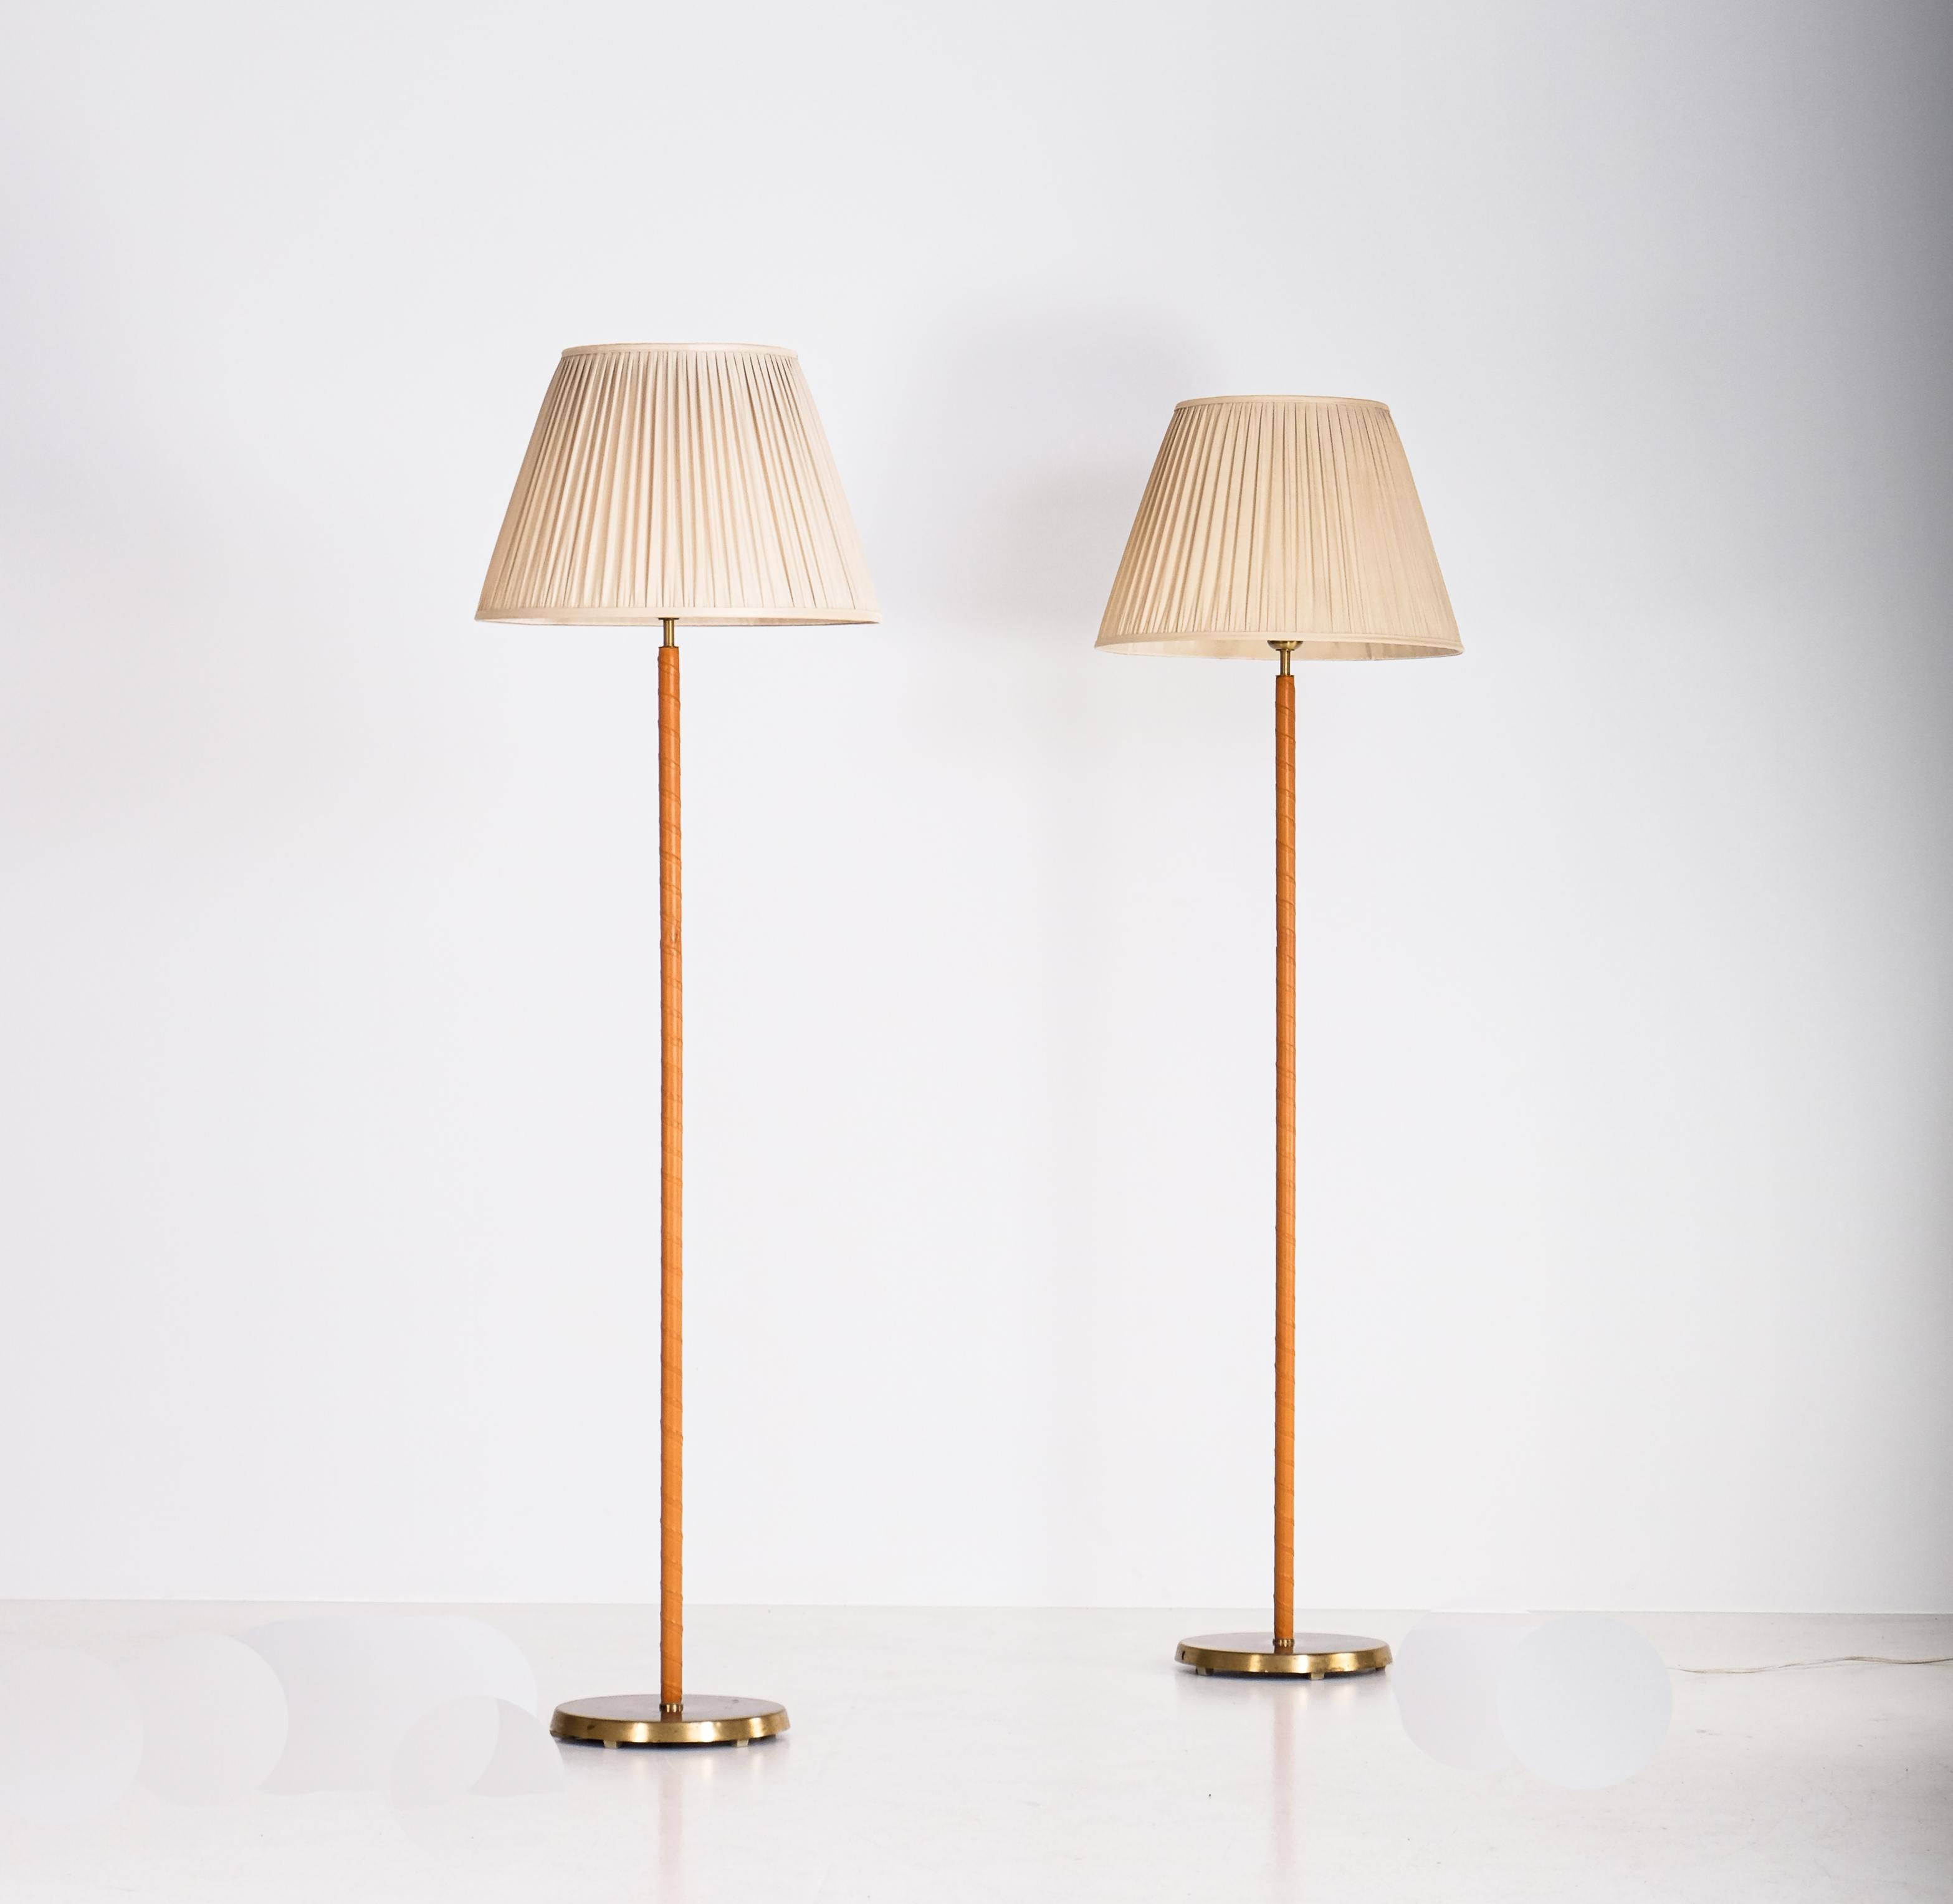 Brass & Leather Floor Lamps, Sweden, 1950s In Good Condition For Sale In Stockholm, SE